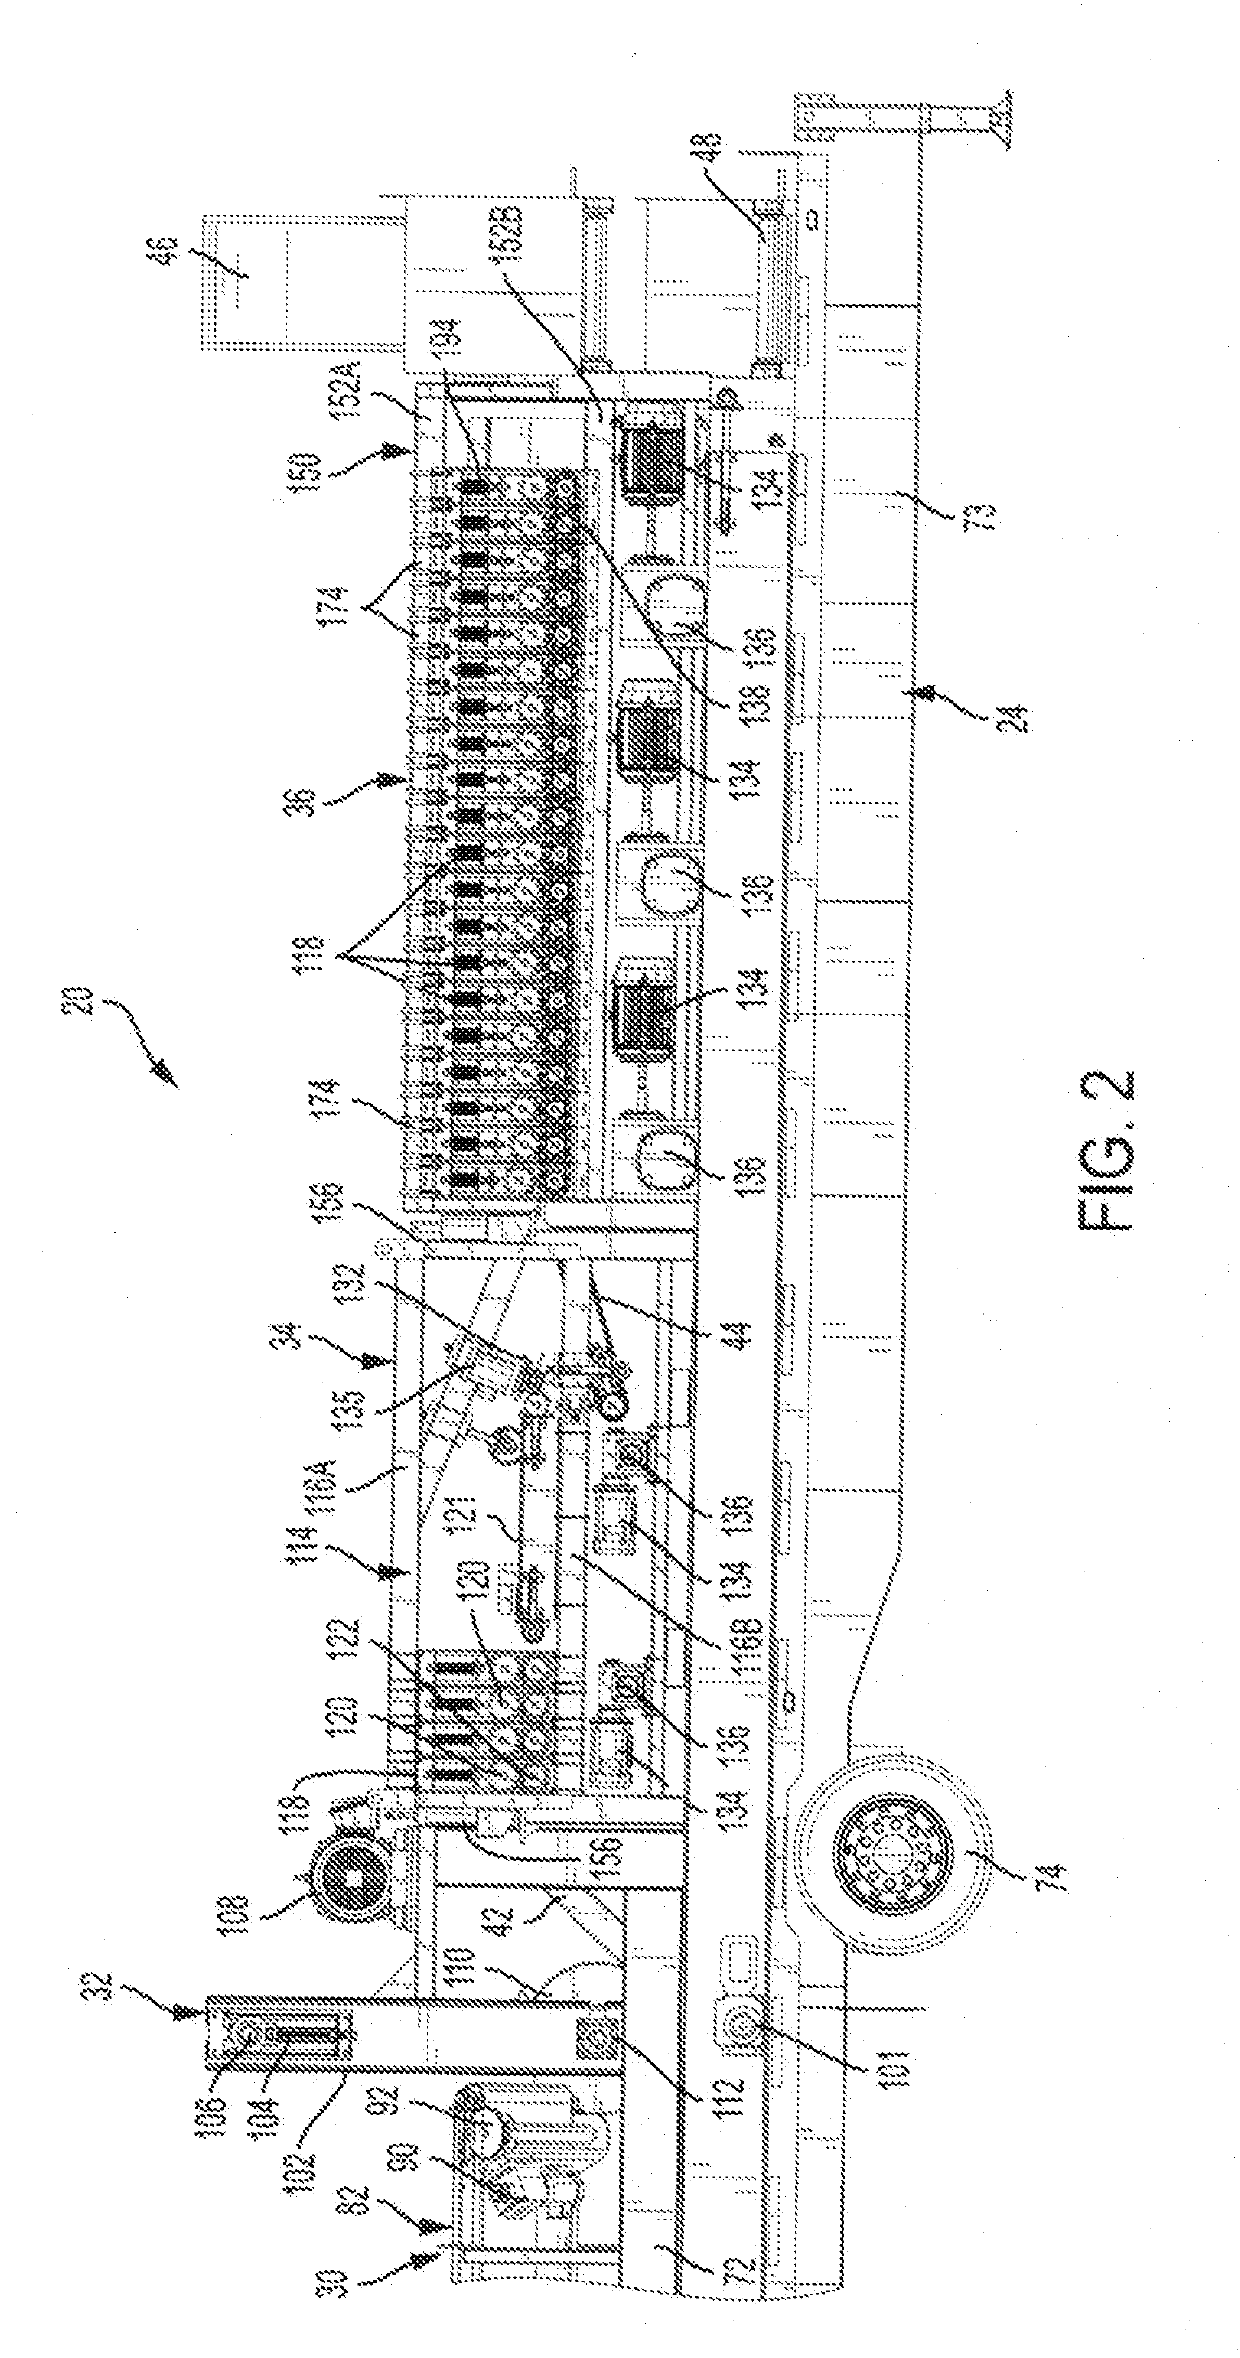 Decortication system and process